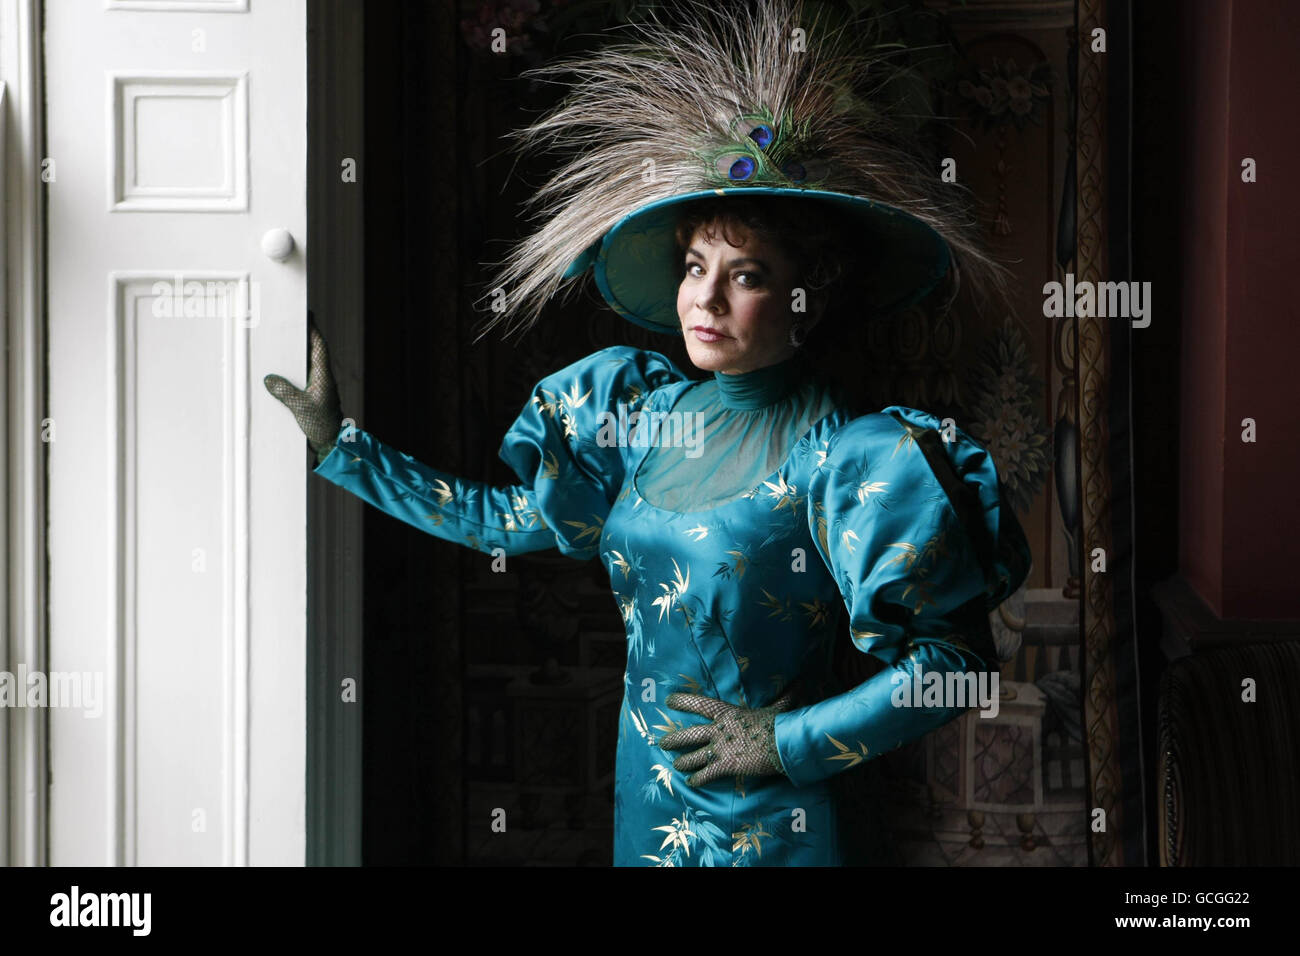 West Wing star Stockard Channing who will play Lady Bracknell in Rough Magic's production of The Importance of Being Earnest, during a photocall in Dublin, ahead of it's opening at the Gaiety Theatre and which runs from June 2-19. Stock Photo